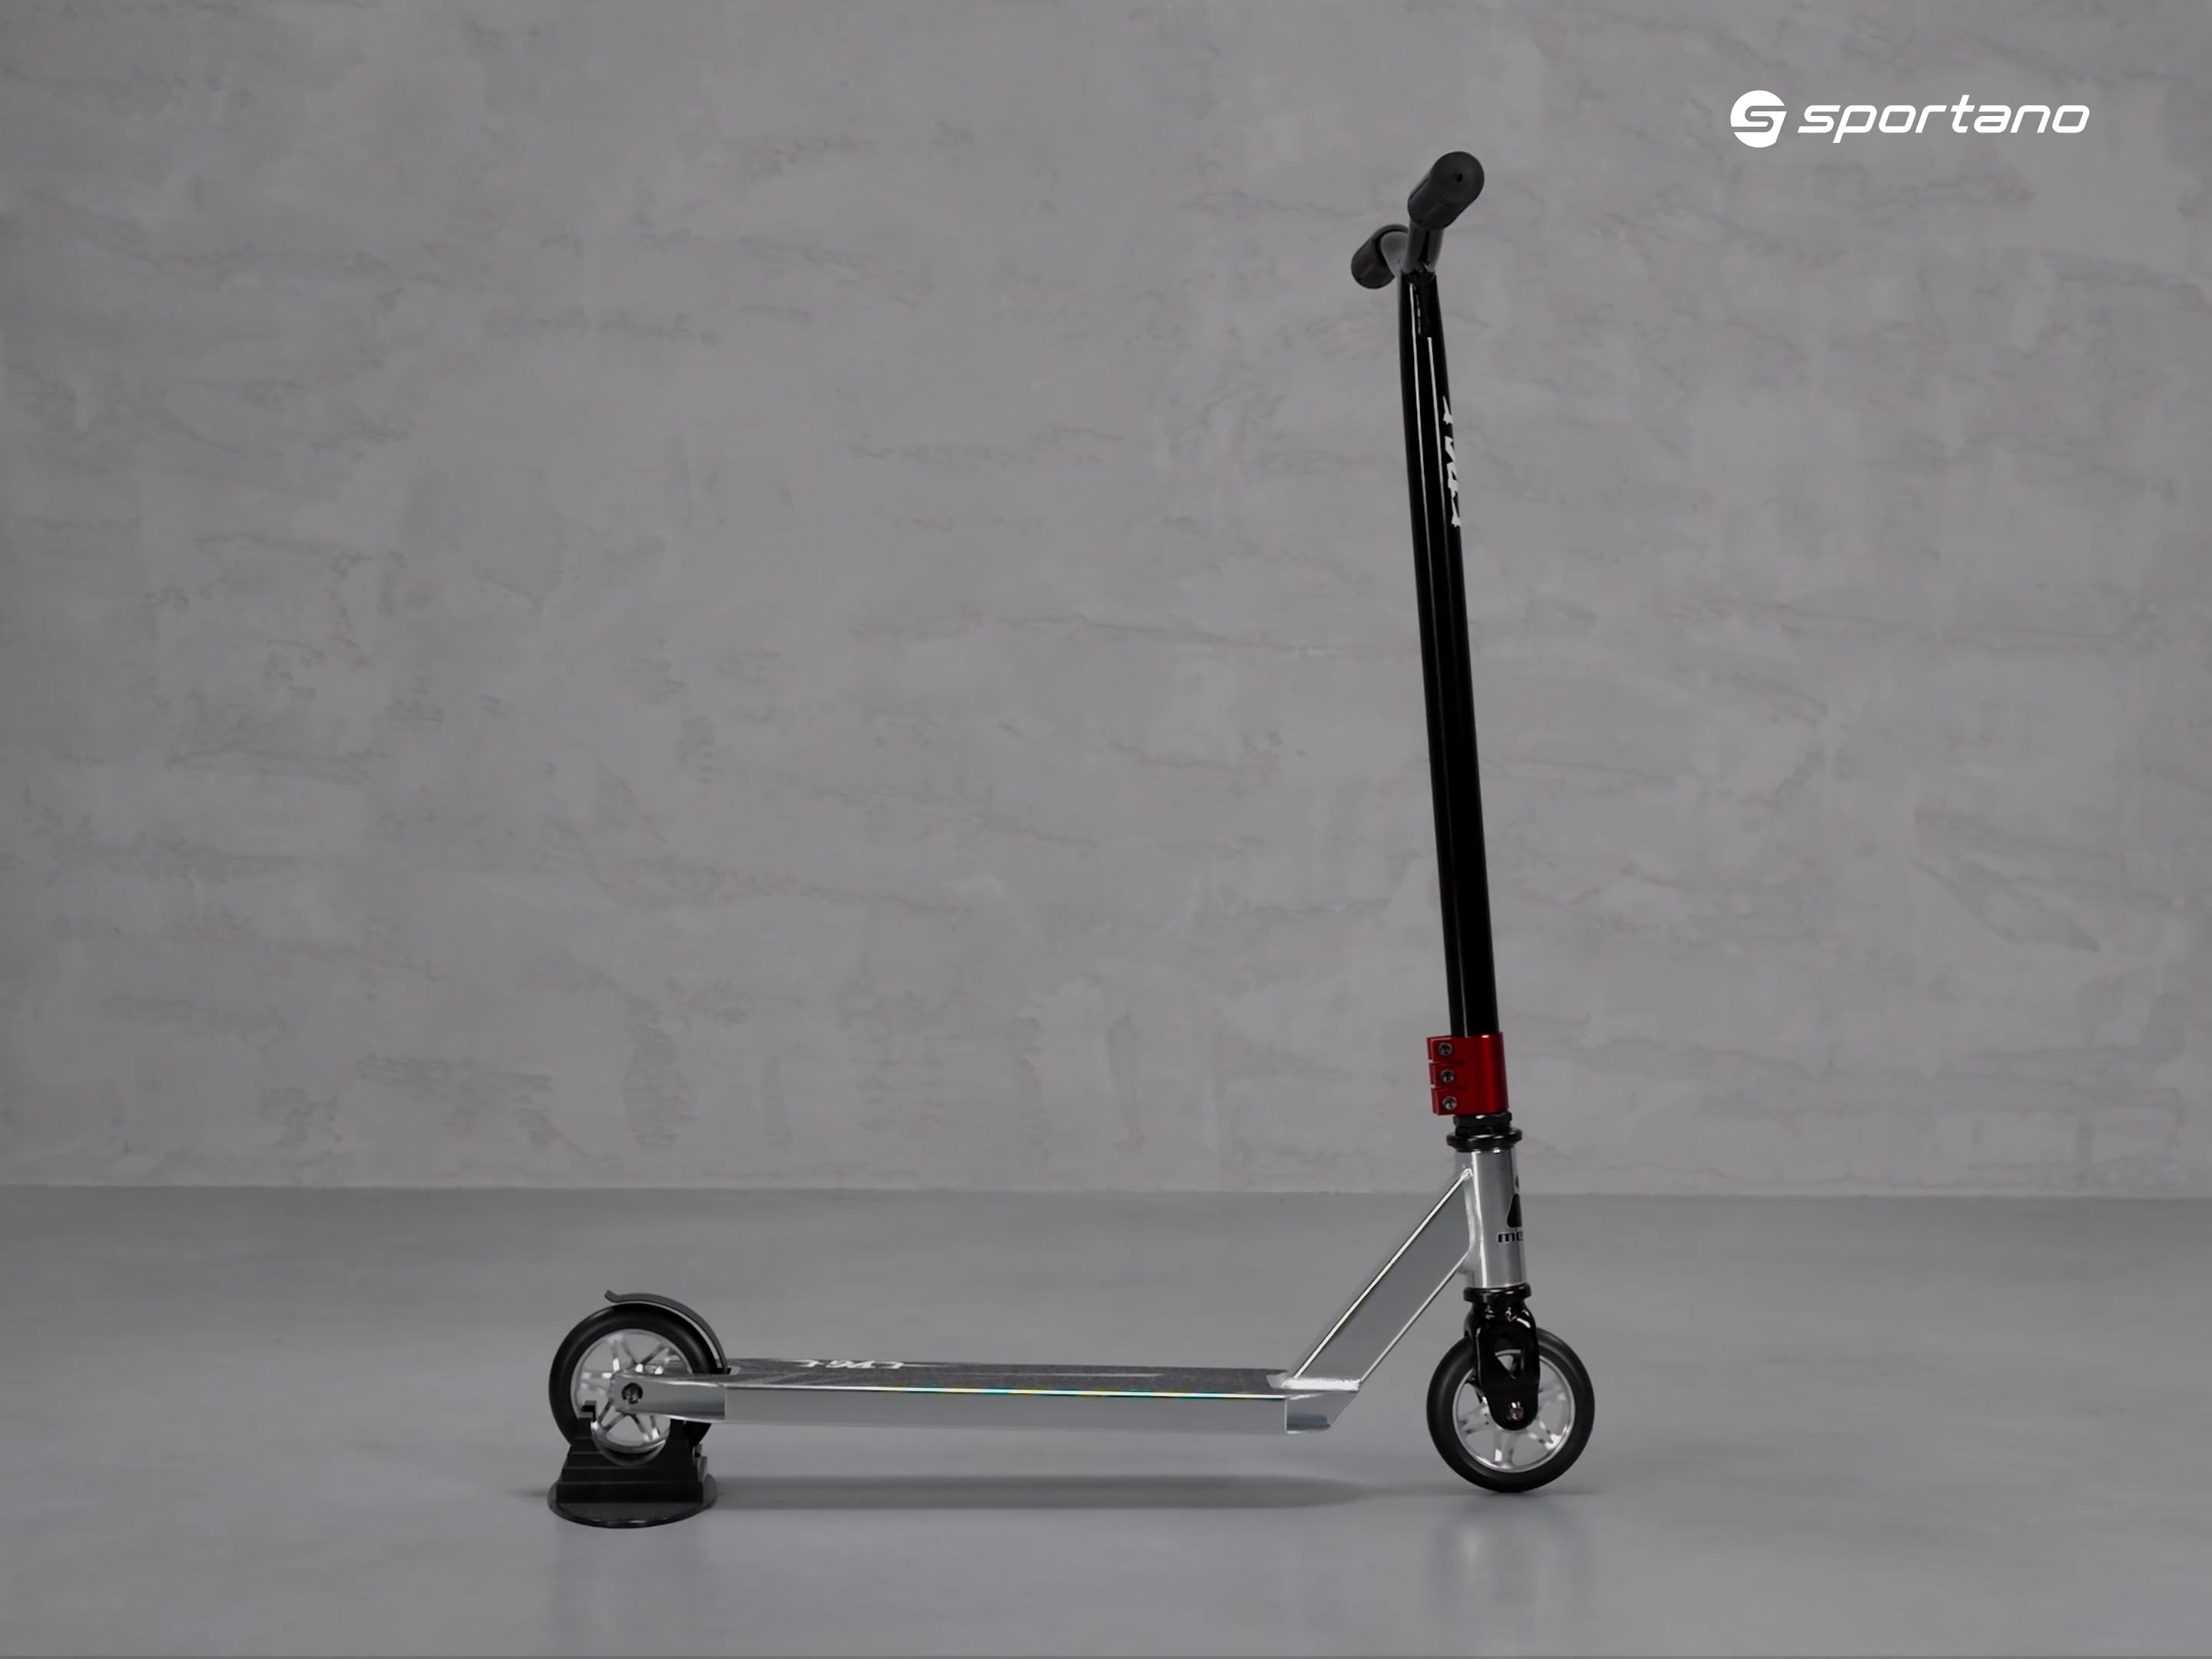 Meteor Edge freestyle scooter silver 22615